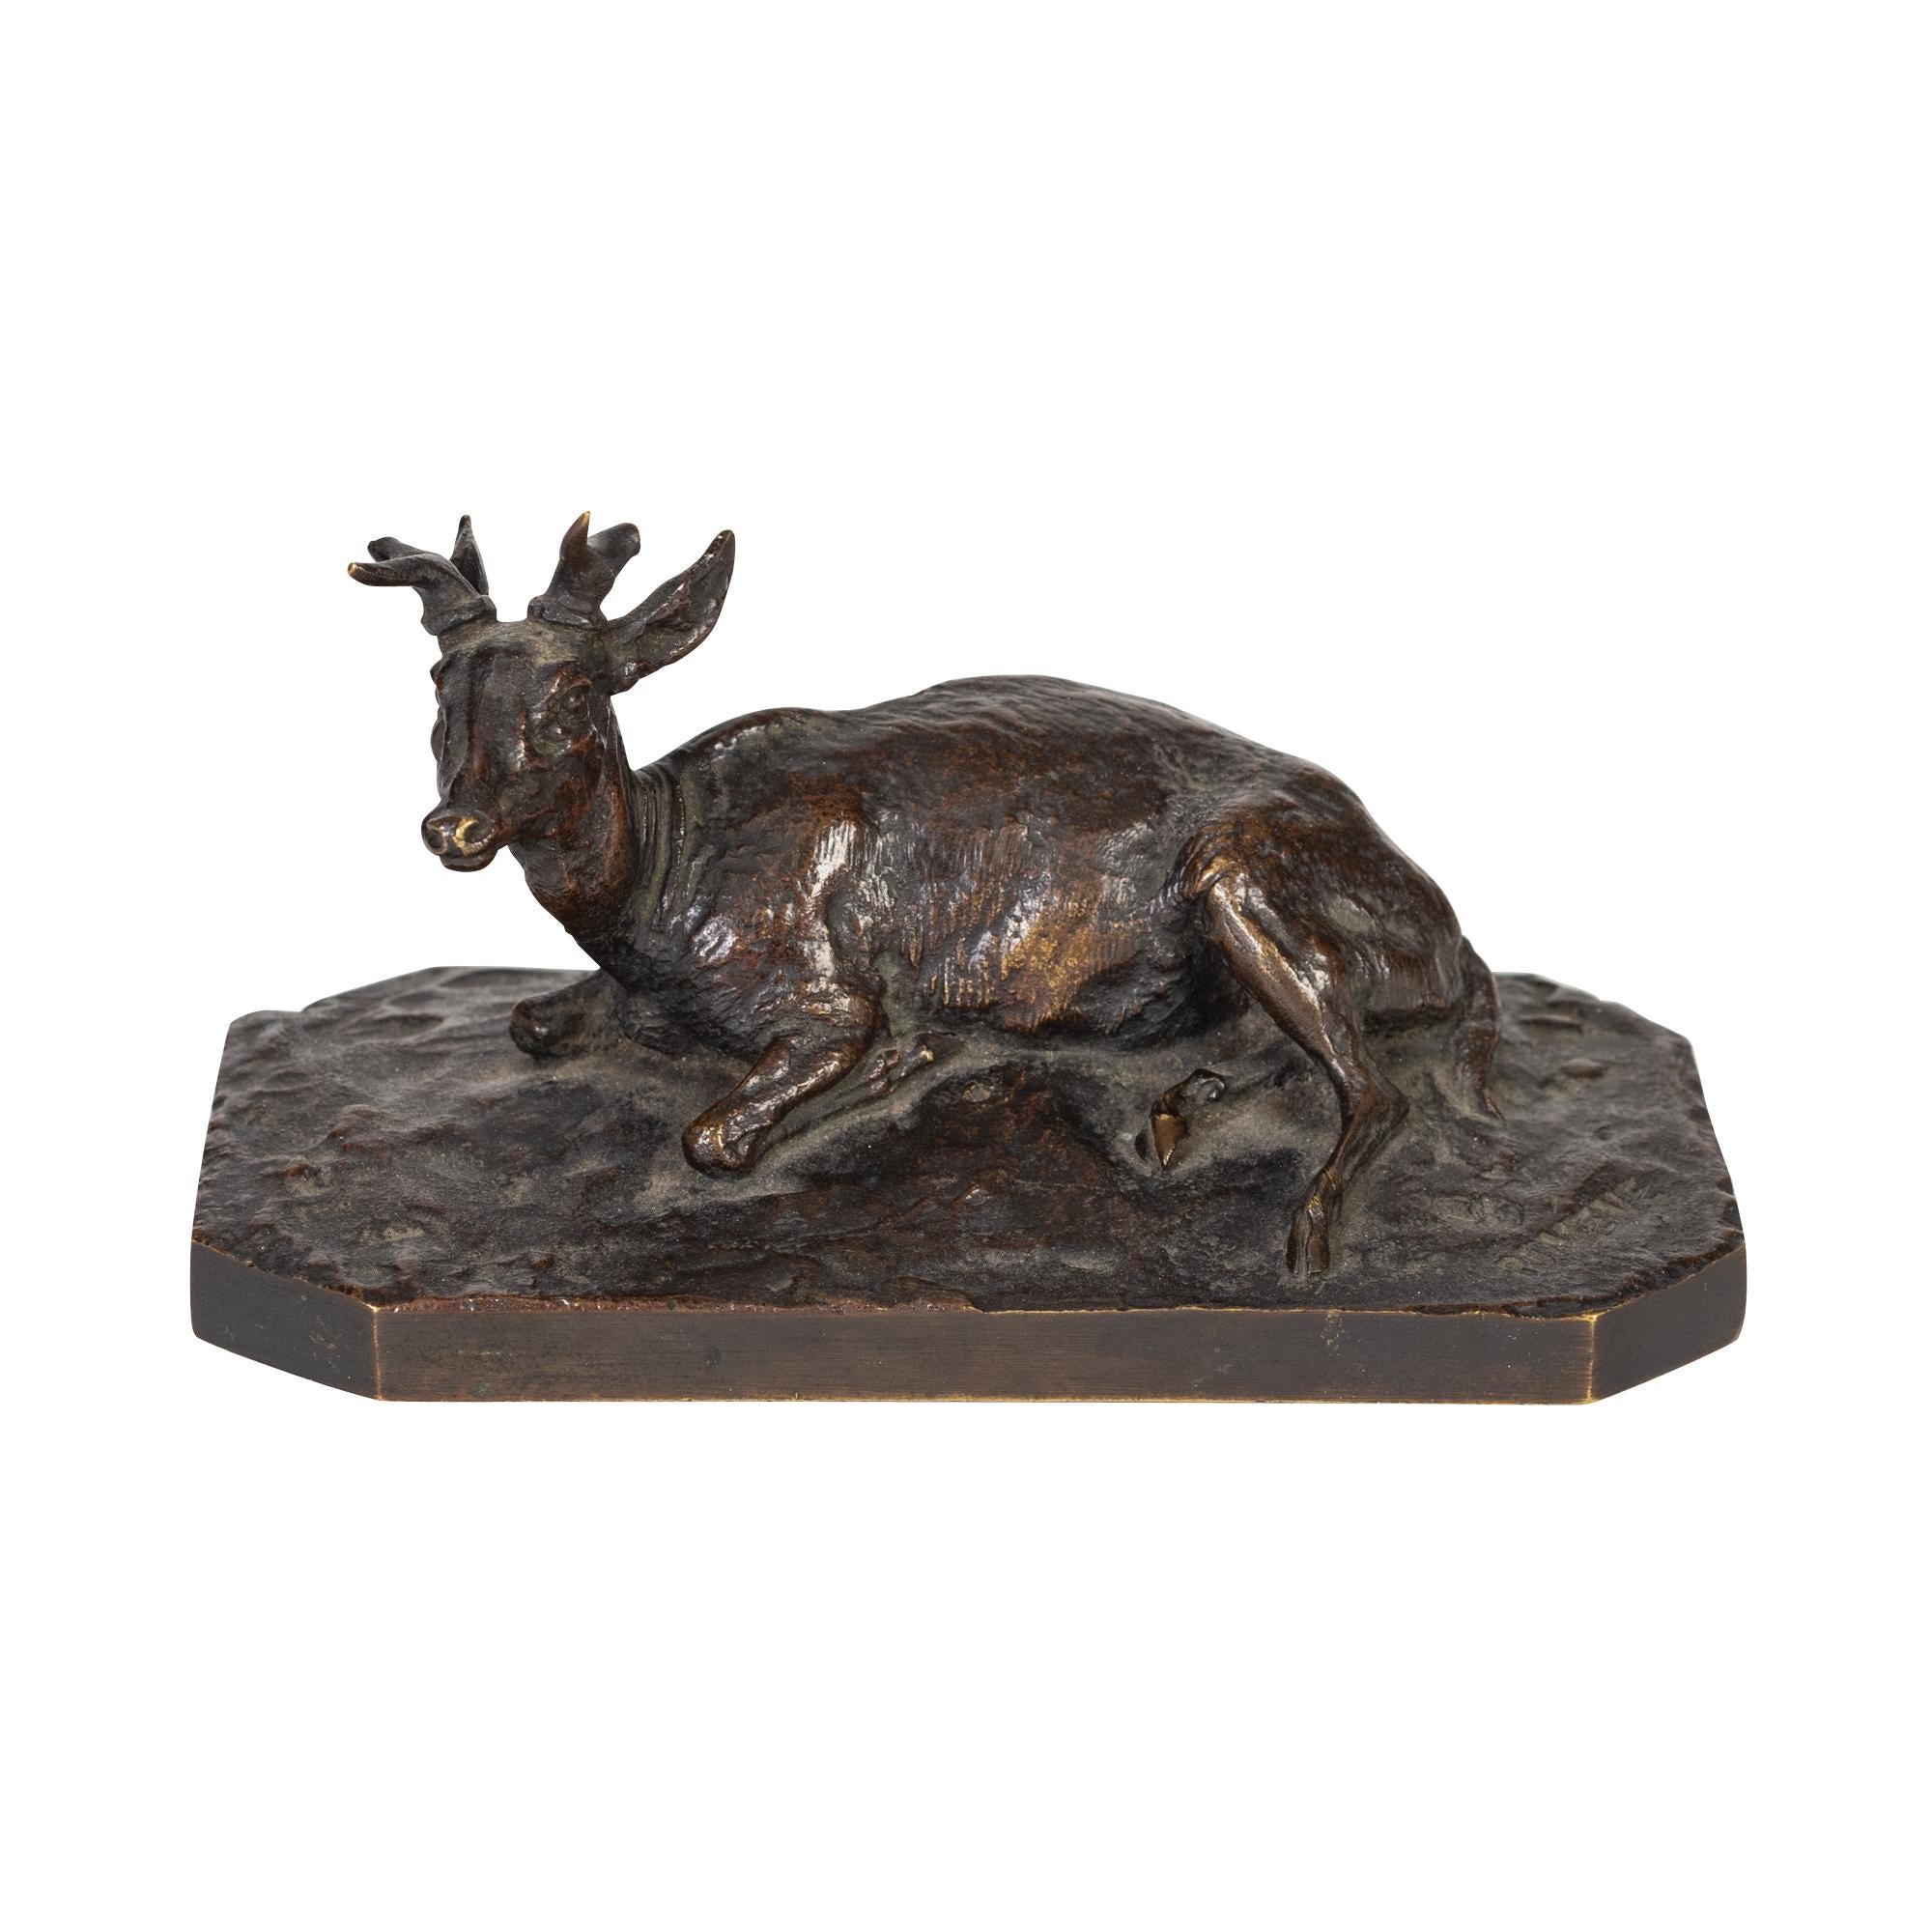 Pierre-Jules MÈNE (1810-1879)
French, A bronze sculpture of a young stag
olive patina, finely cast and chiseled, 
signed in the cast PJ MENE, 
Dimensions: 
Width 4.80 in. (12.2 cm.) 
Depth 2.63 in. (6.7 cm.) 
Height 2.48 in. (6.3 cm.).
 